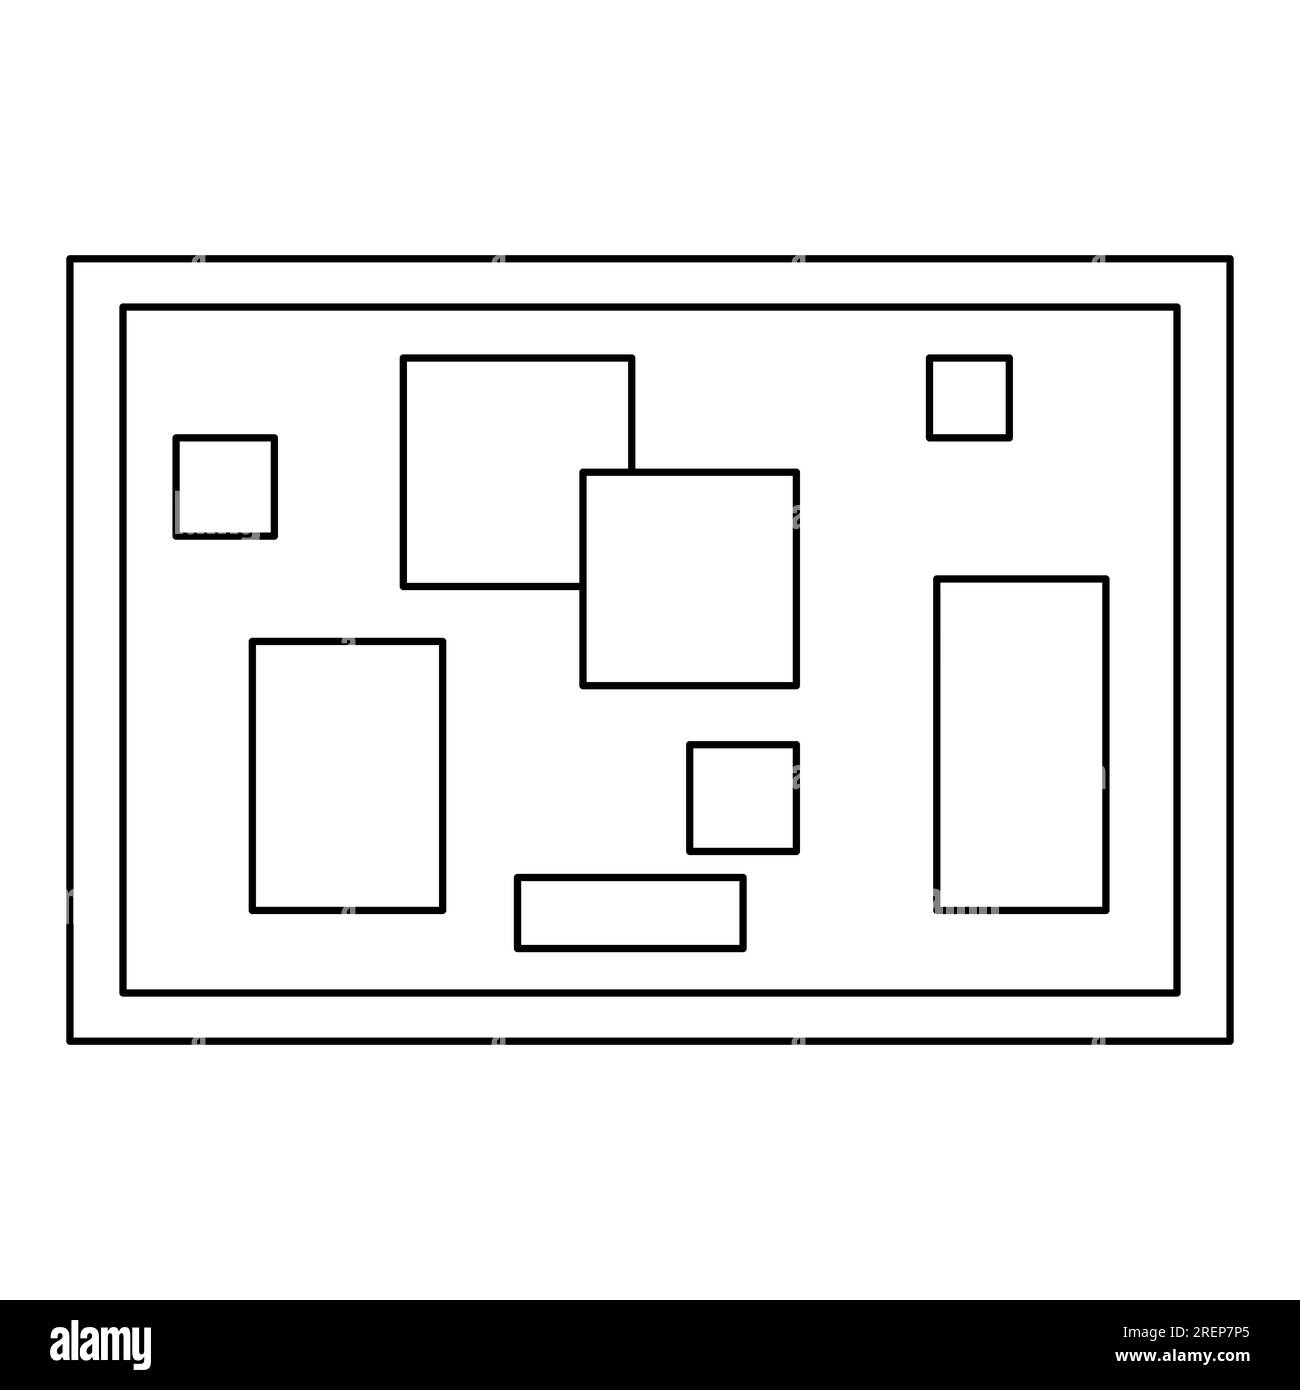 Minecraft Slime Coloring Pages - Get Coloring Pages